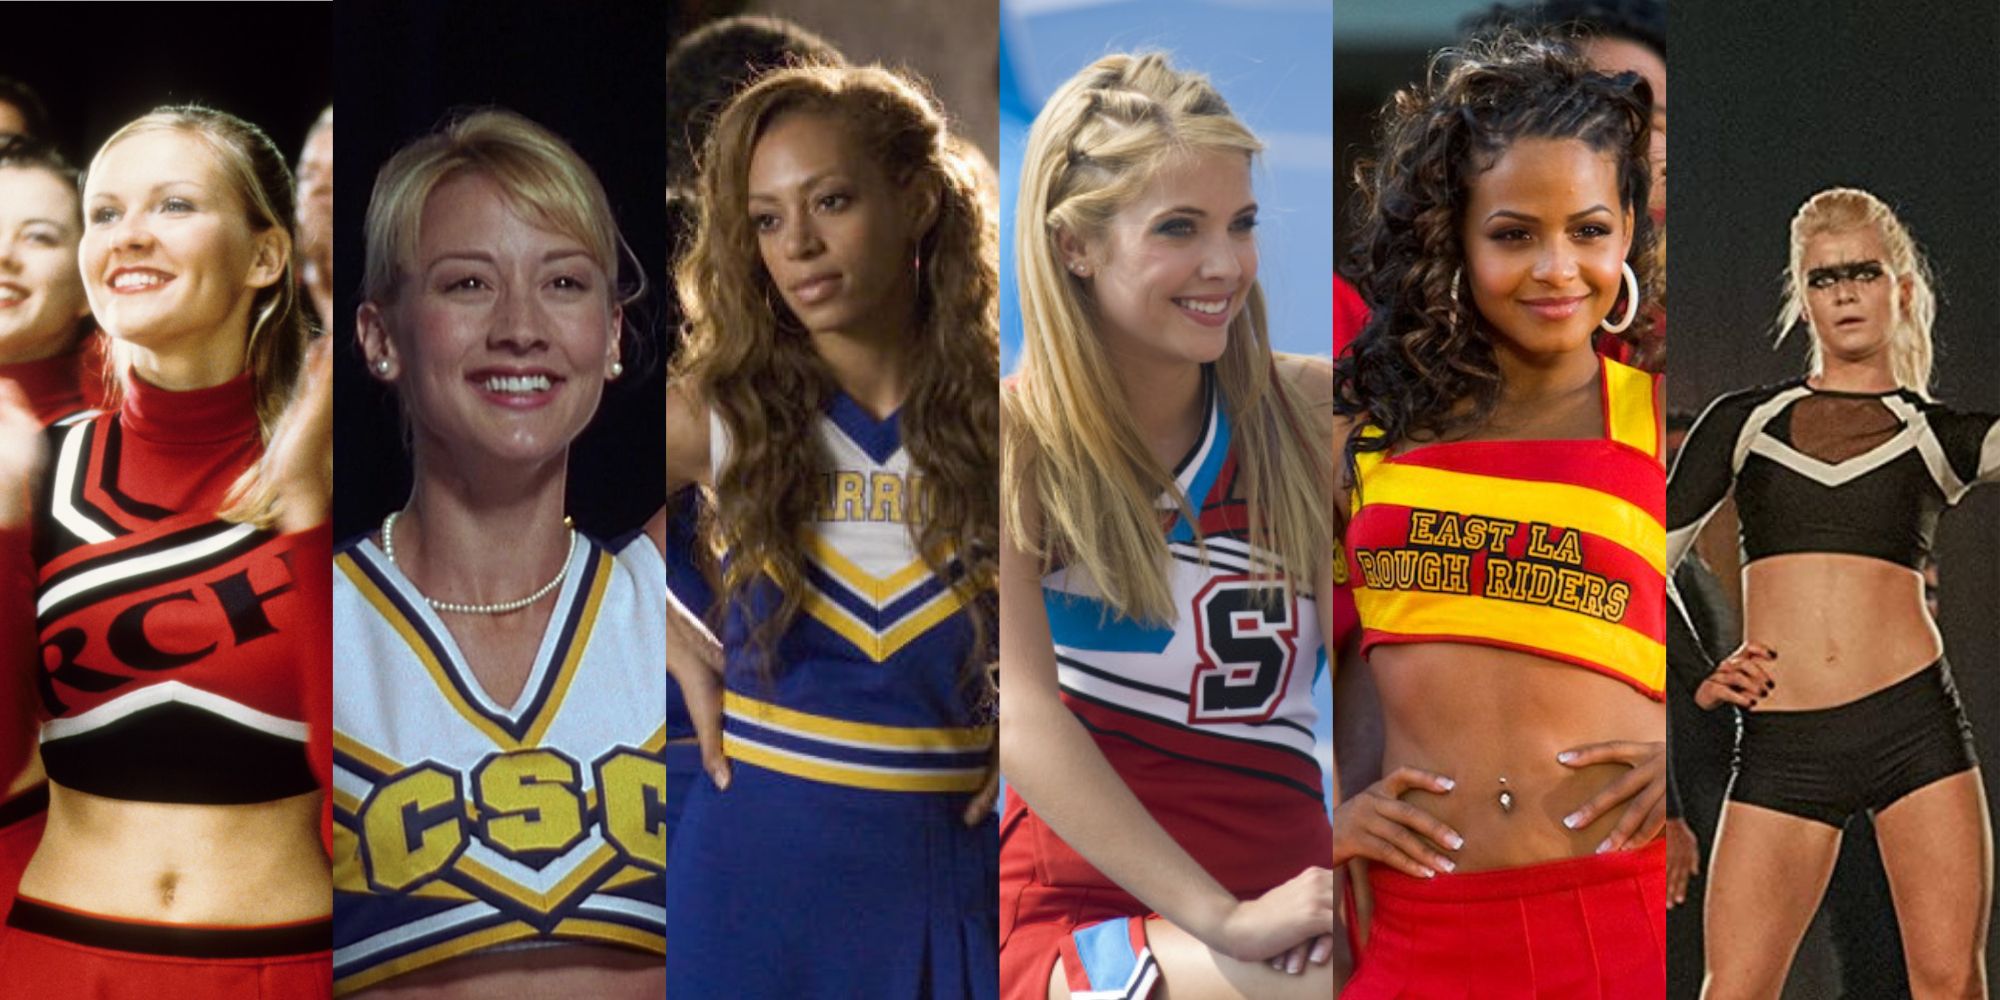 School Spirit: Every 'Bring it On' Movie, Ranked According To Rotten  Tomatoes